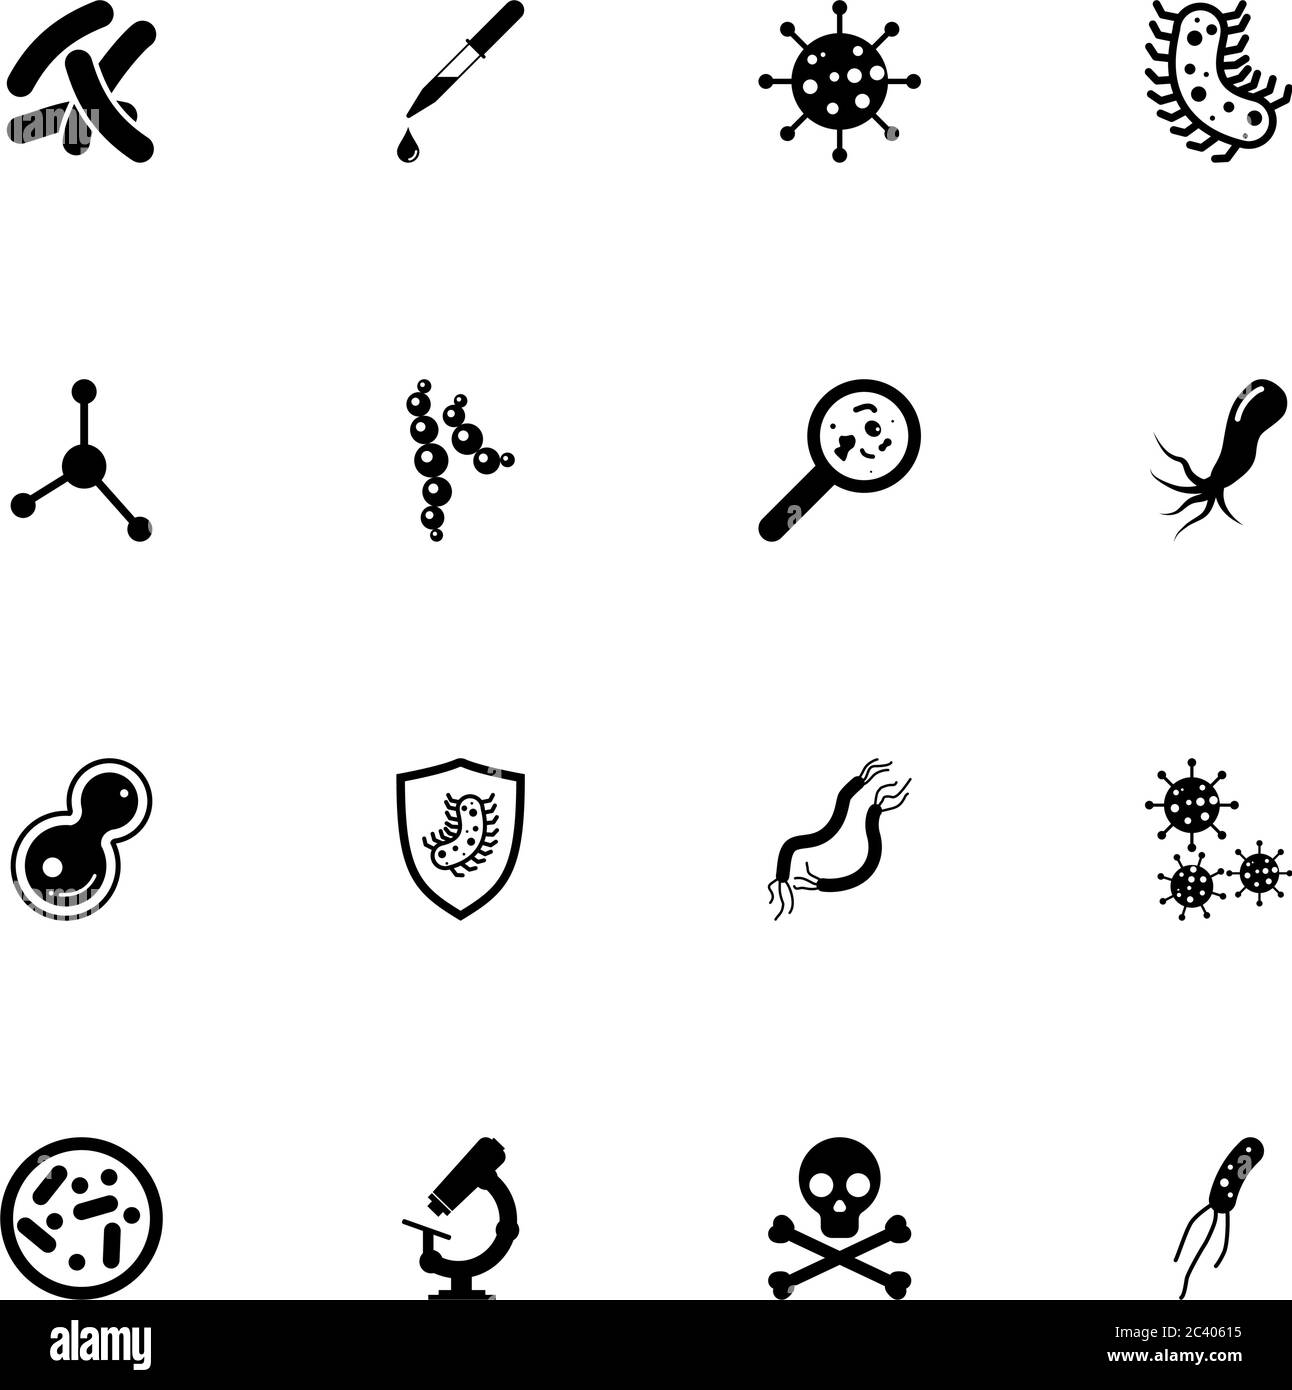 Bacteria icon - Expand to any size - Change to any colour. Perfect Flat Vector Contains such Icons as, microscope, skull, worm, helminth, virus, cell, Stock Vector